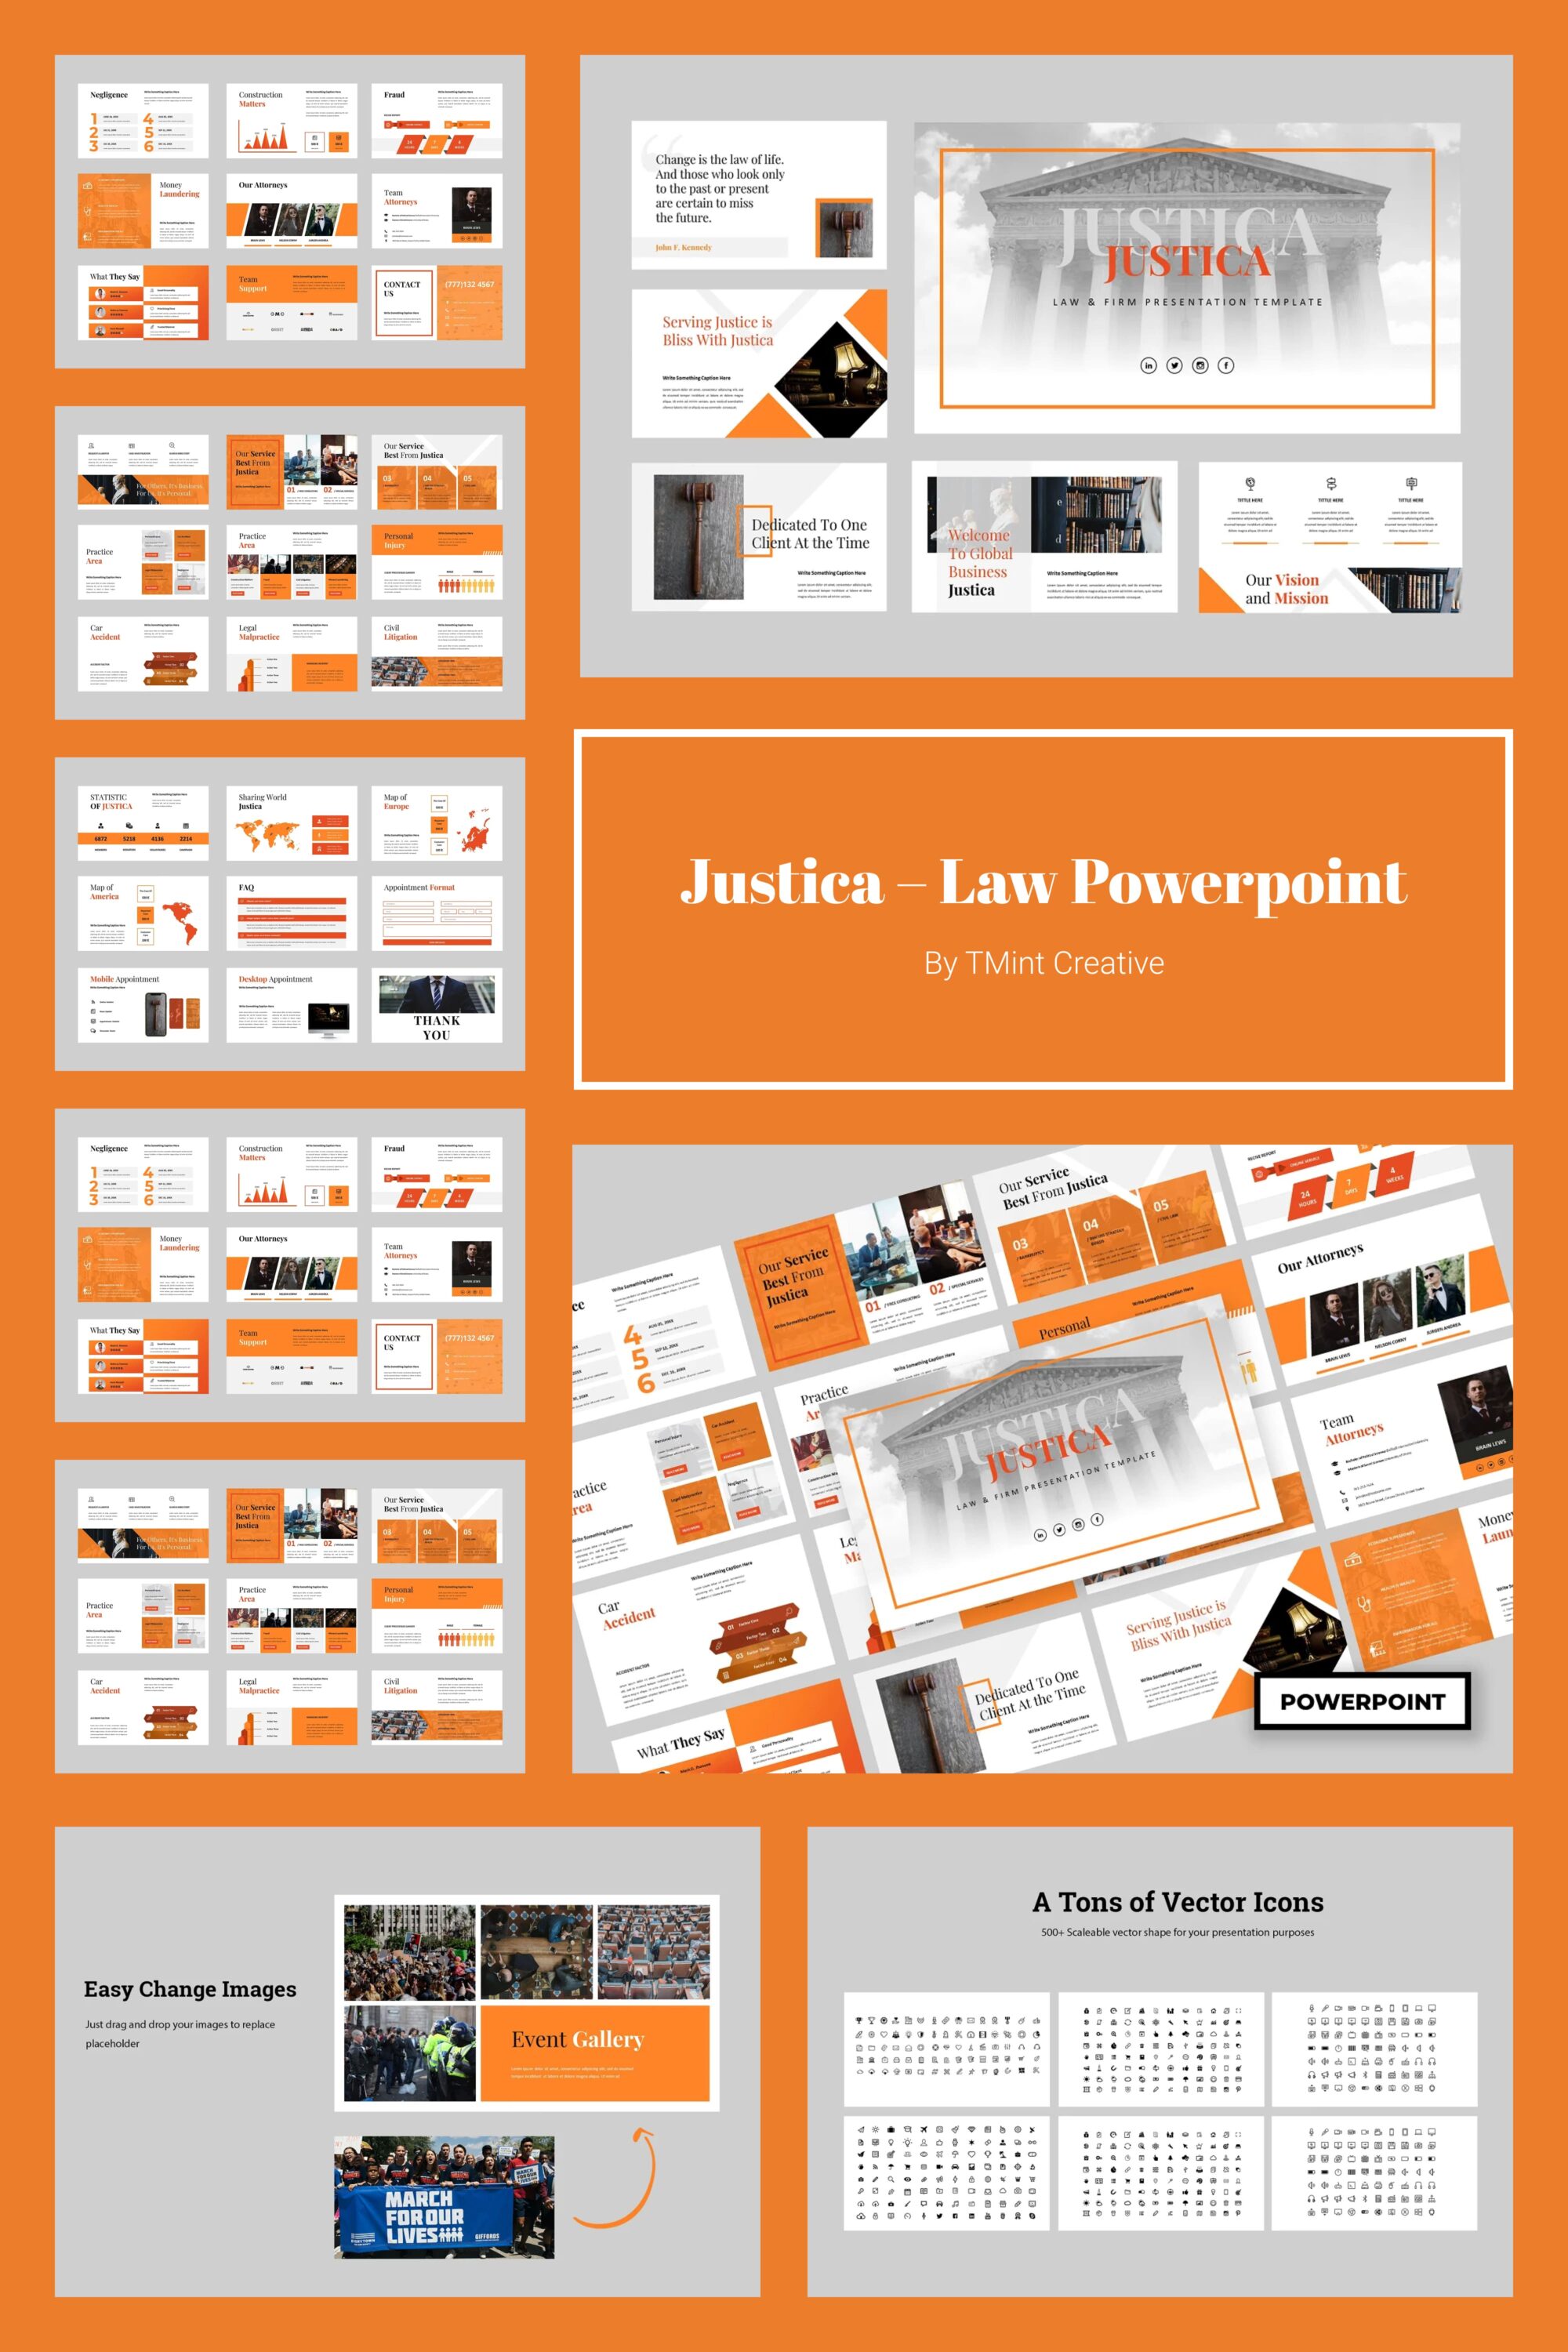 Justica Law Powerpoint 06.